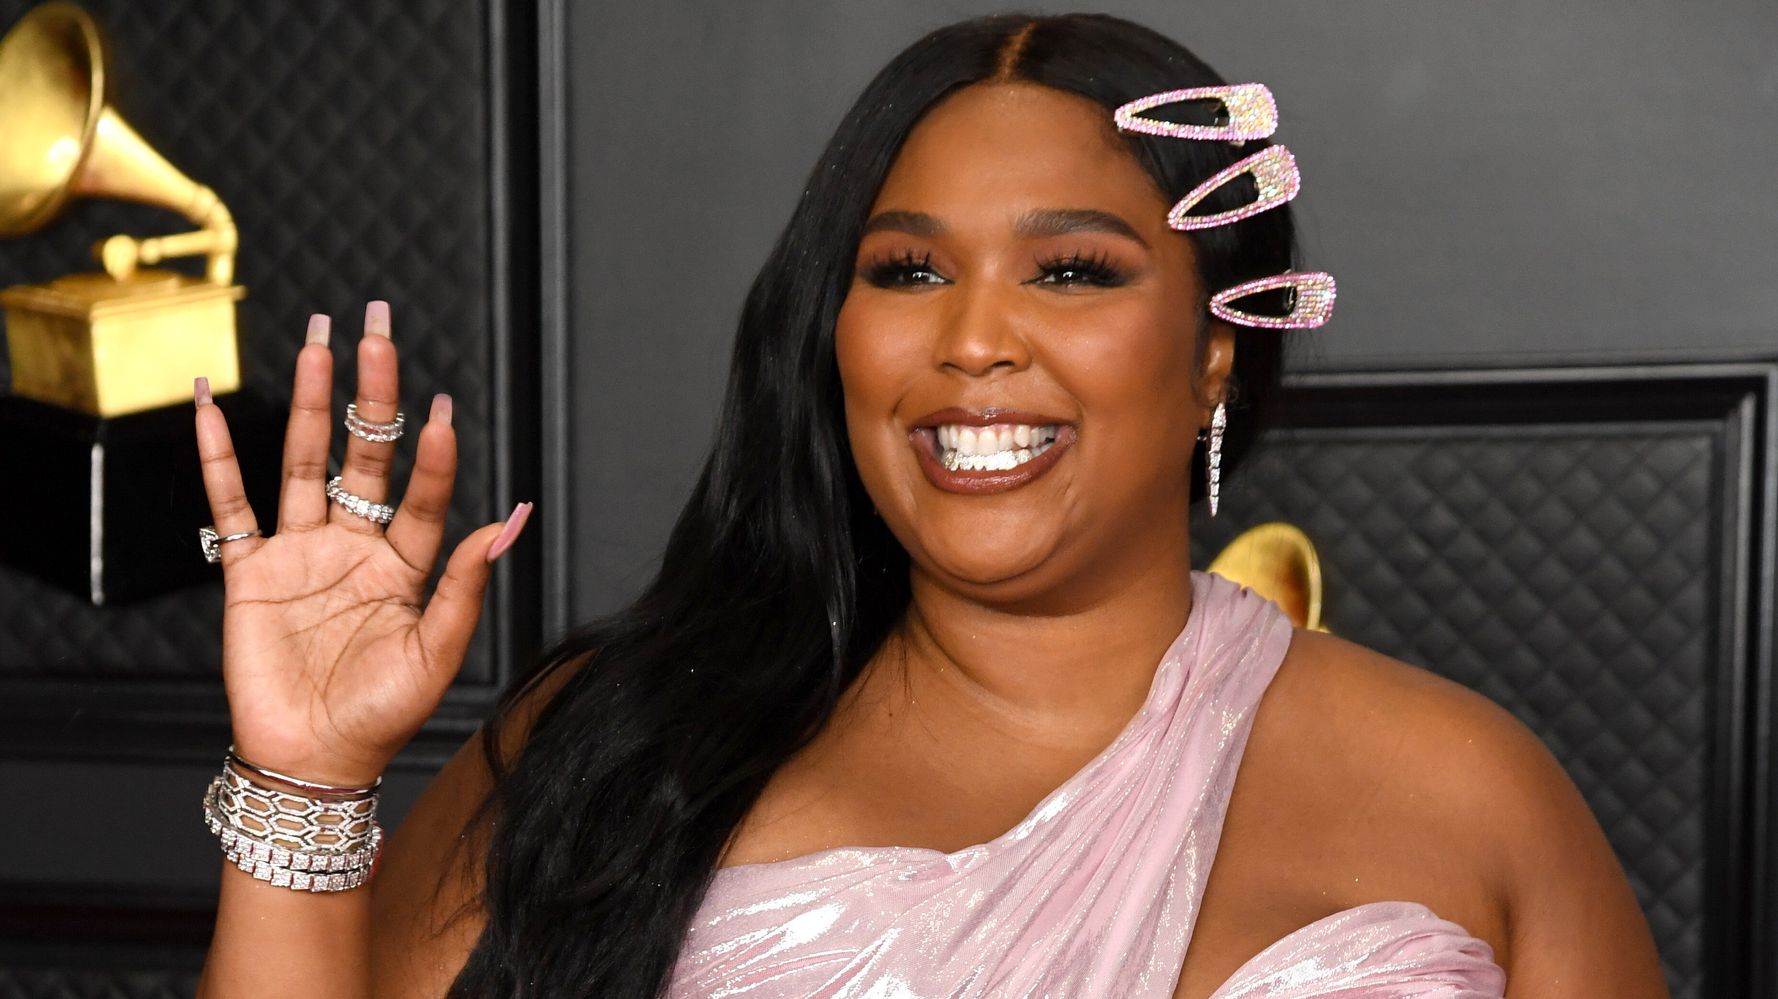 Lizzo Surprises Her Mom With A New Wardrobe In Heartfelt Video